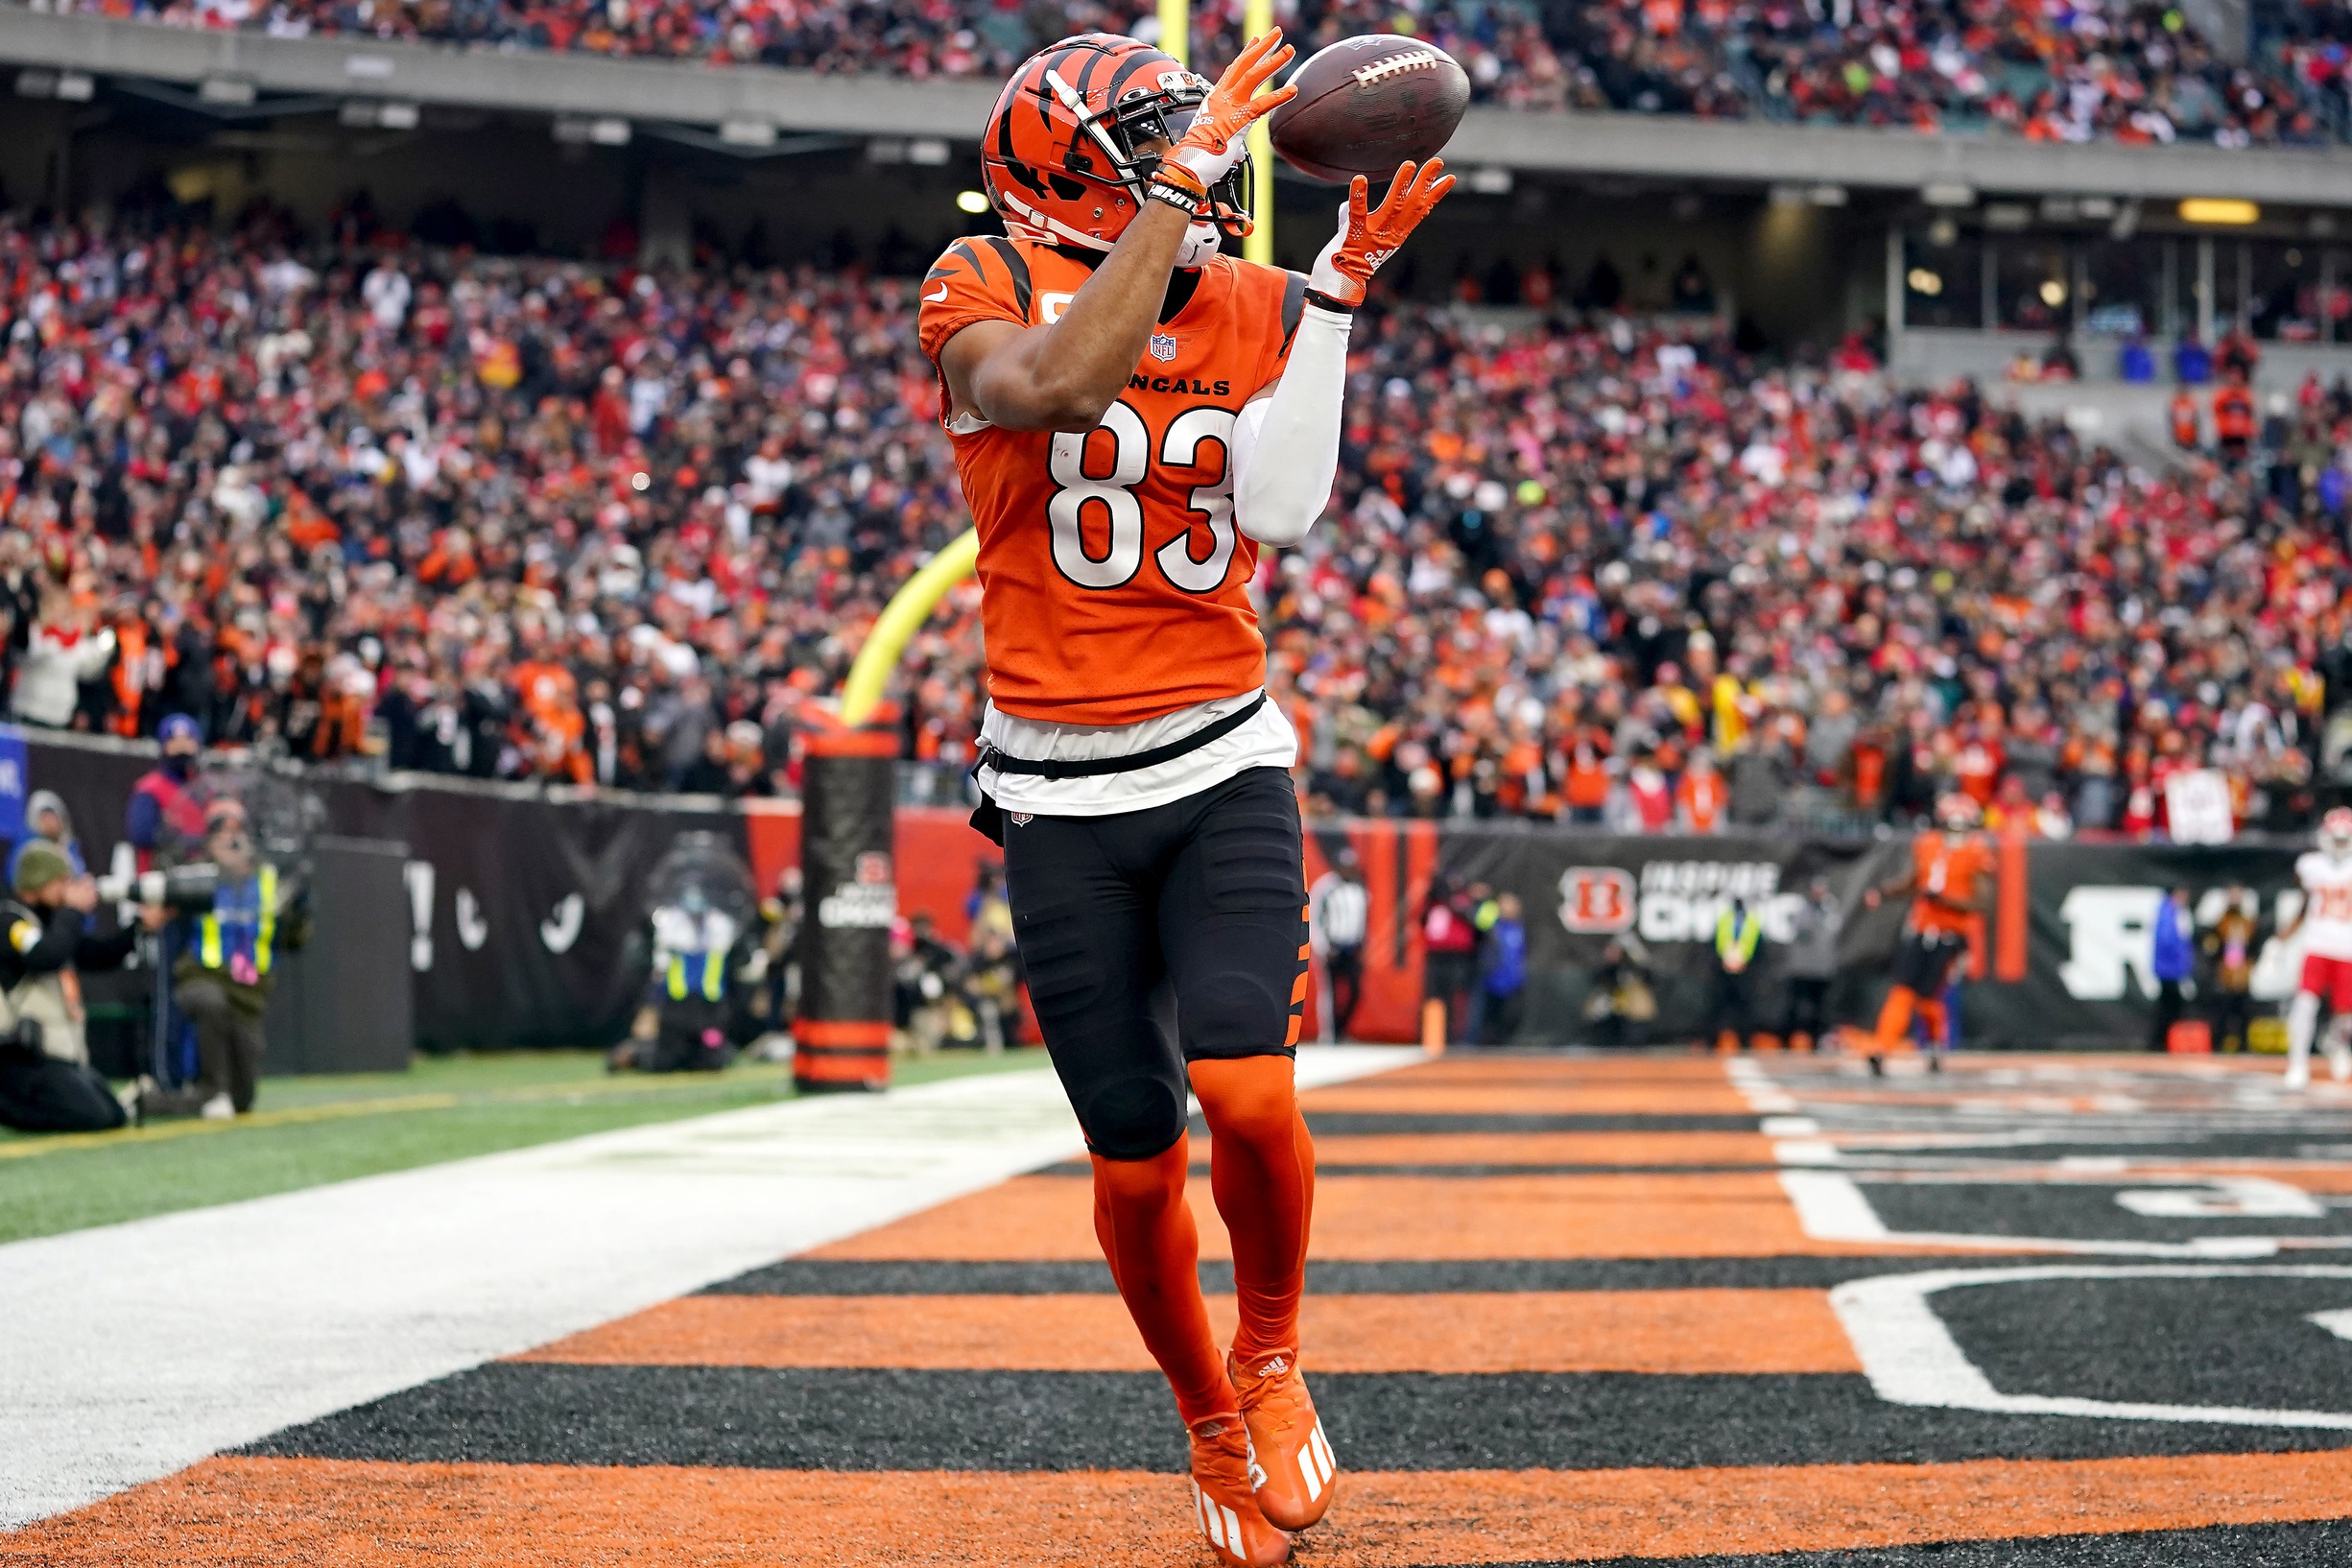 2022 fantasy football Best Ball sleepers to target include Devin  Singletary, Russell Gage, and Tyler Boyd